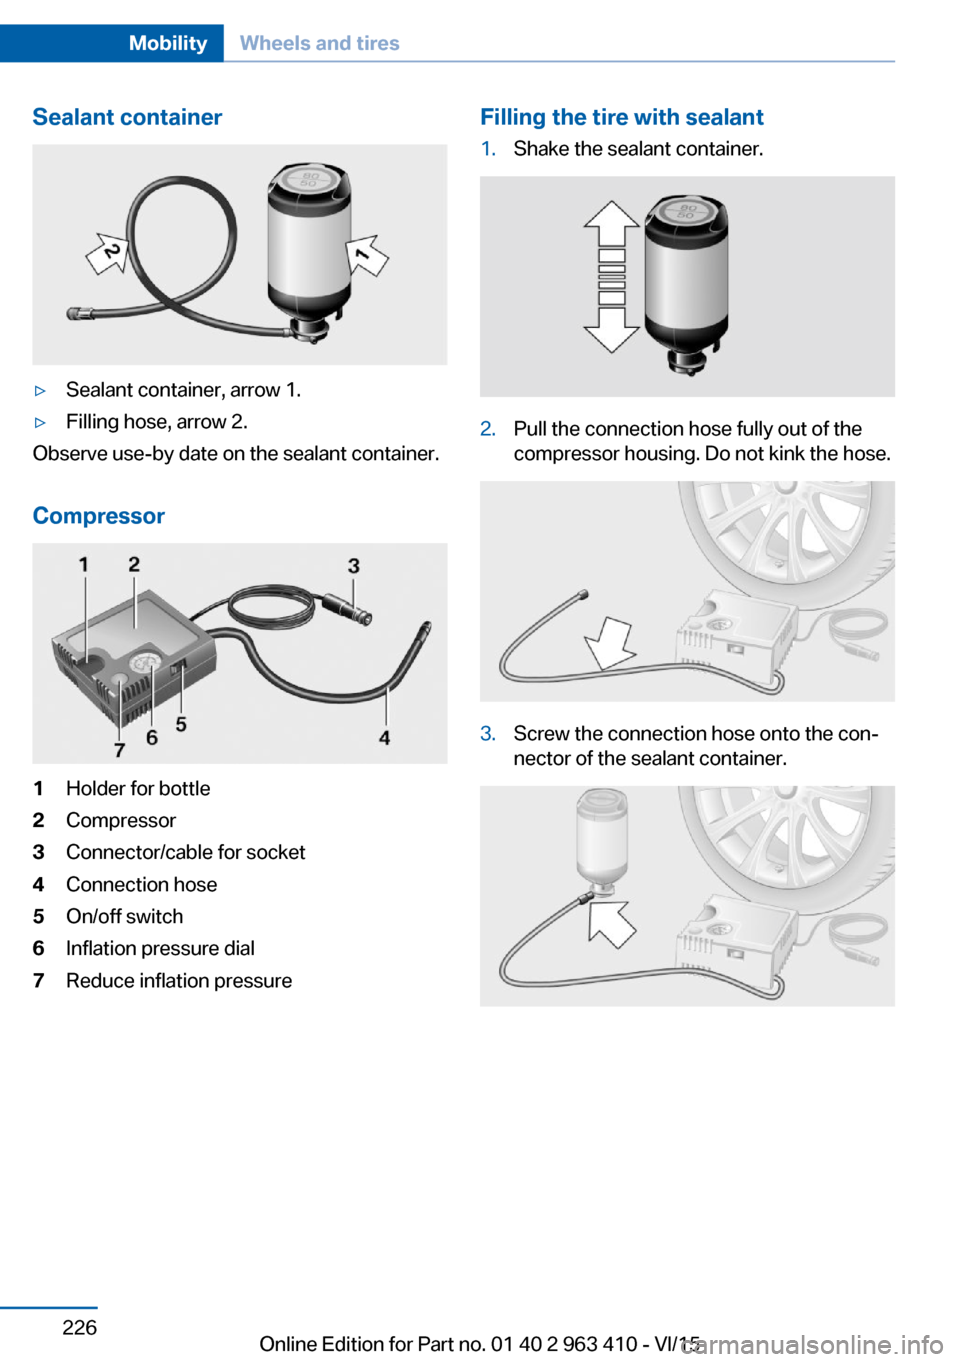 BMW X5 2016 F15 Owners Guide Sealant container▷Sealant container, arrow 1.▷Filling hose, arrow 2.
Observe use-by date on the sealant container.
Compressor
1Holder for bottle2Compressor3Connector/cable for socket4Connection ho